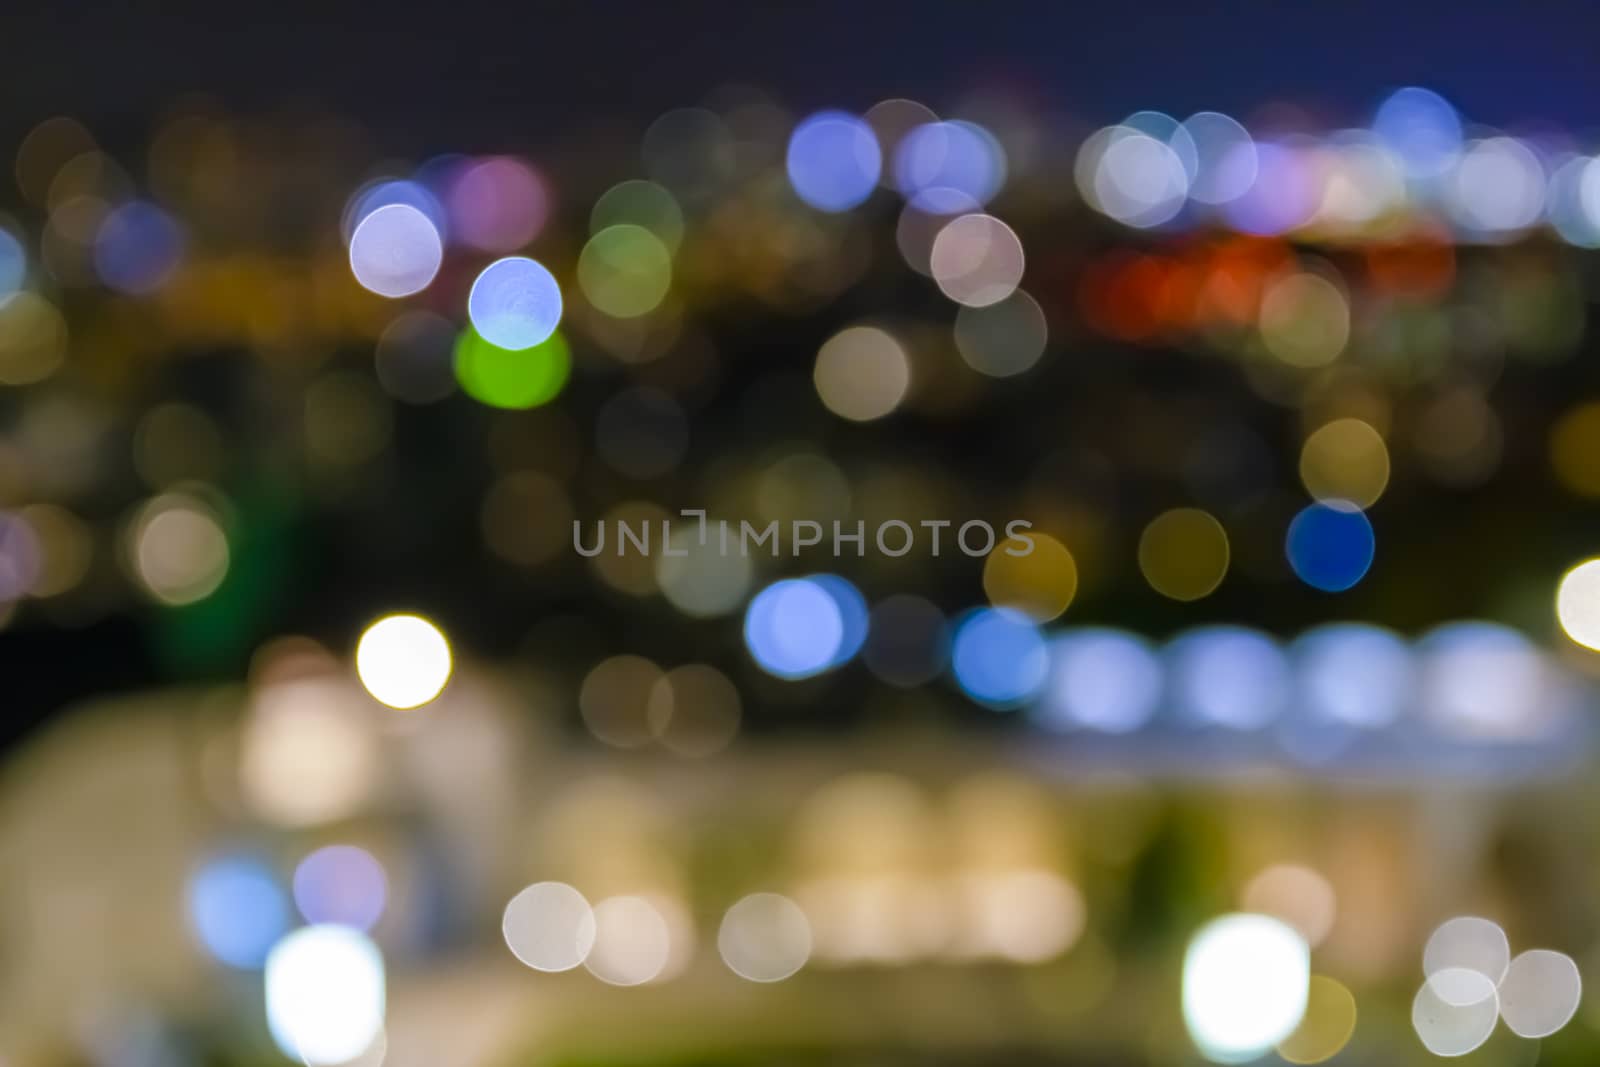 city lights; blurred bokeh; background; colorful